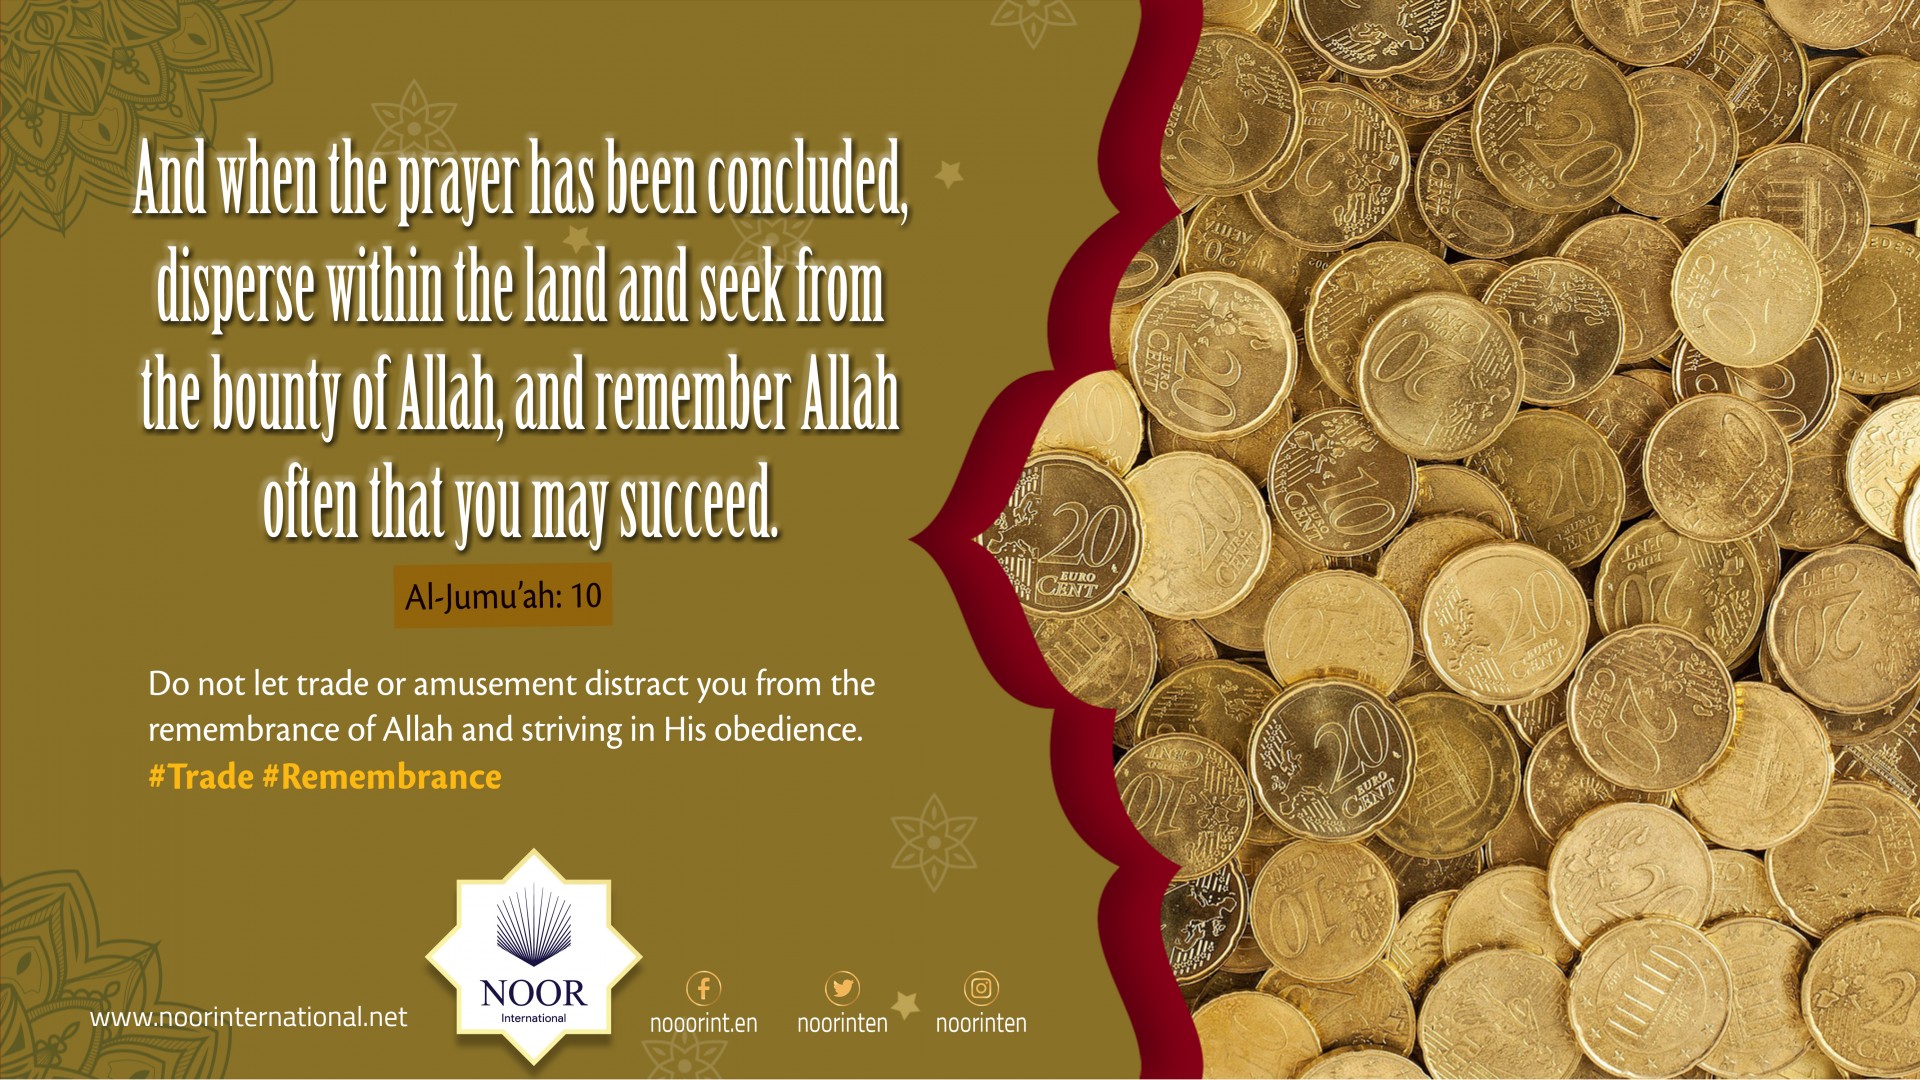 "Do not let trade or amusement distract you from the remembrance of Allah.."